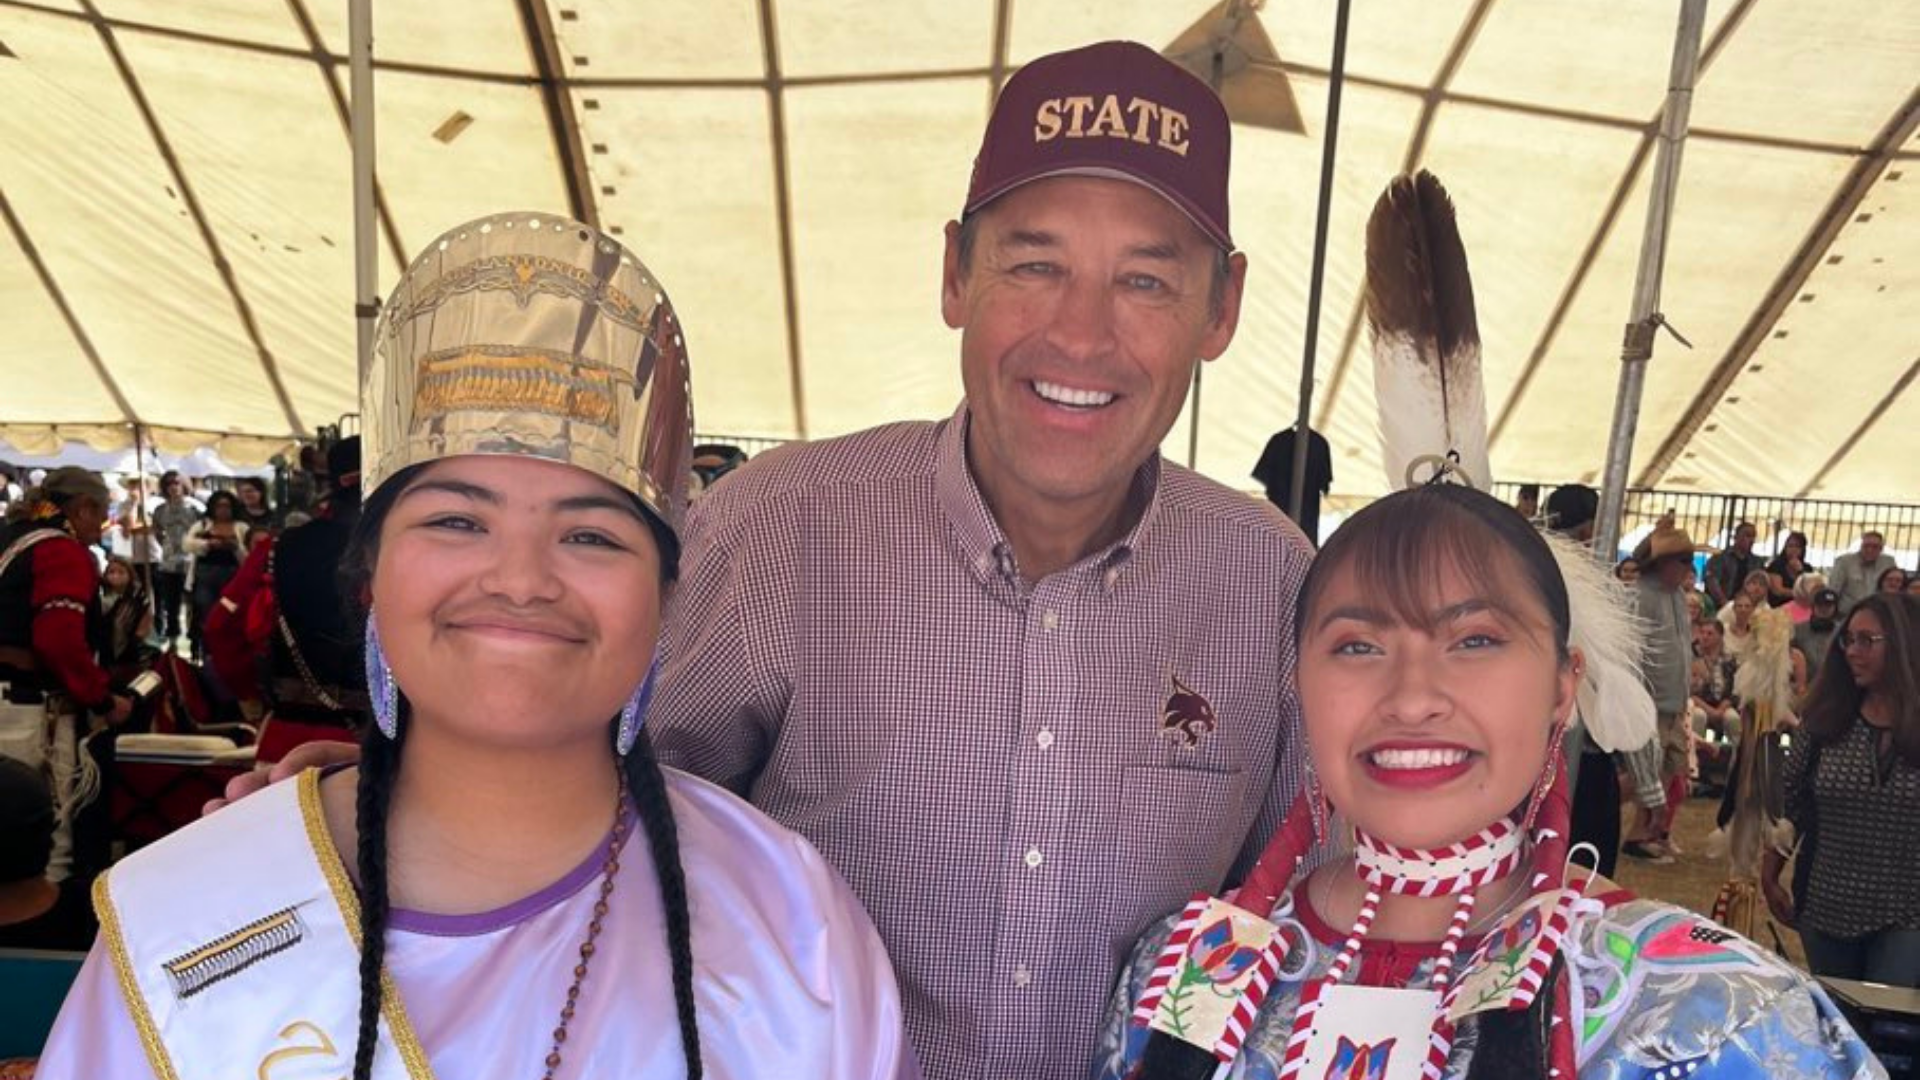 President Damphousse posing with two students at the Sacred Spring Powwow.